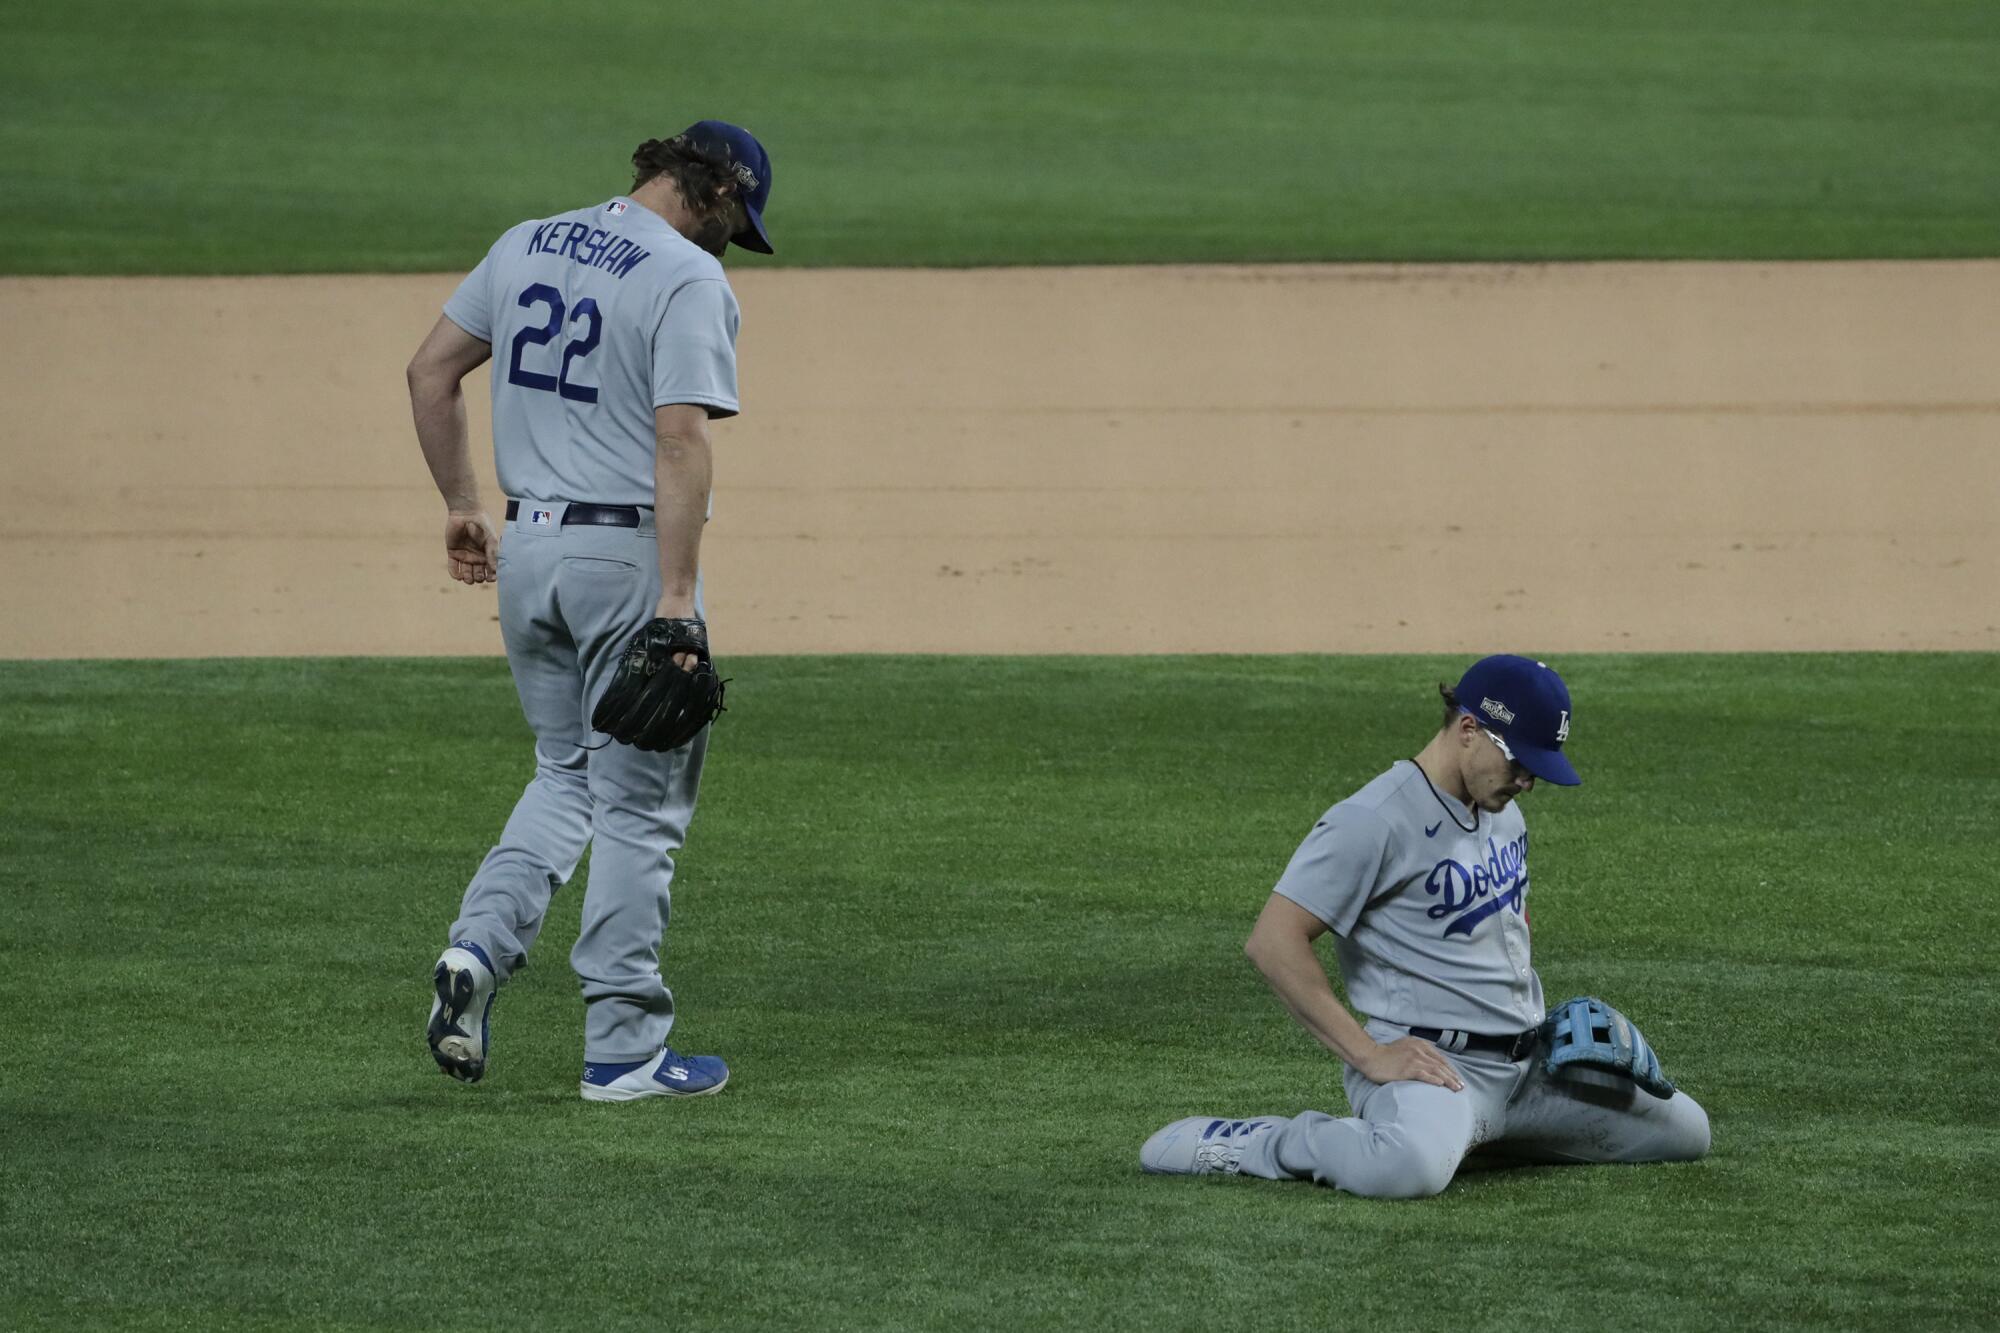 Dodgers pitcher Clayton Kershaw and shortstop Kike Hernandez can't make a play on an infield single.